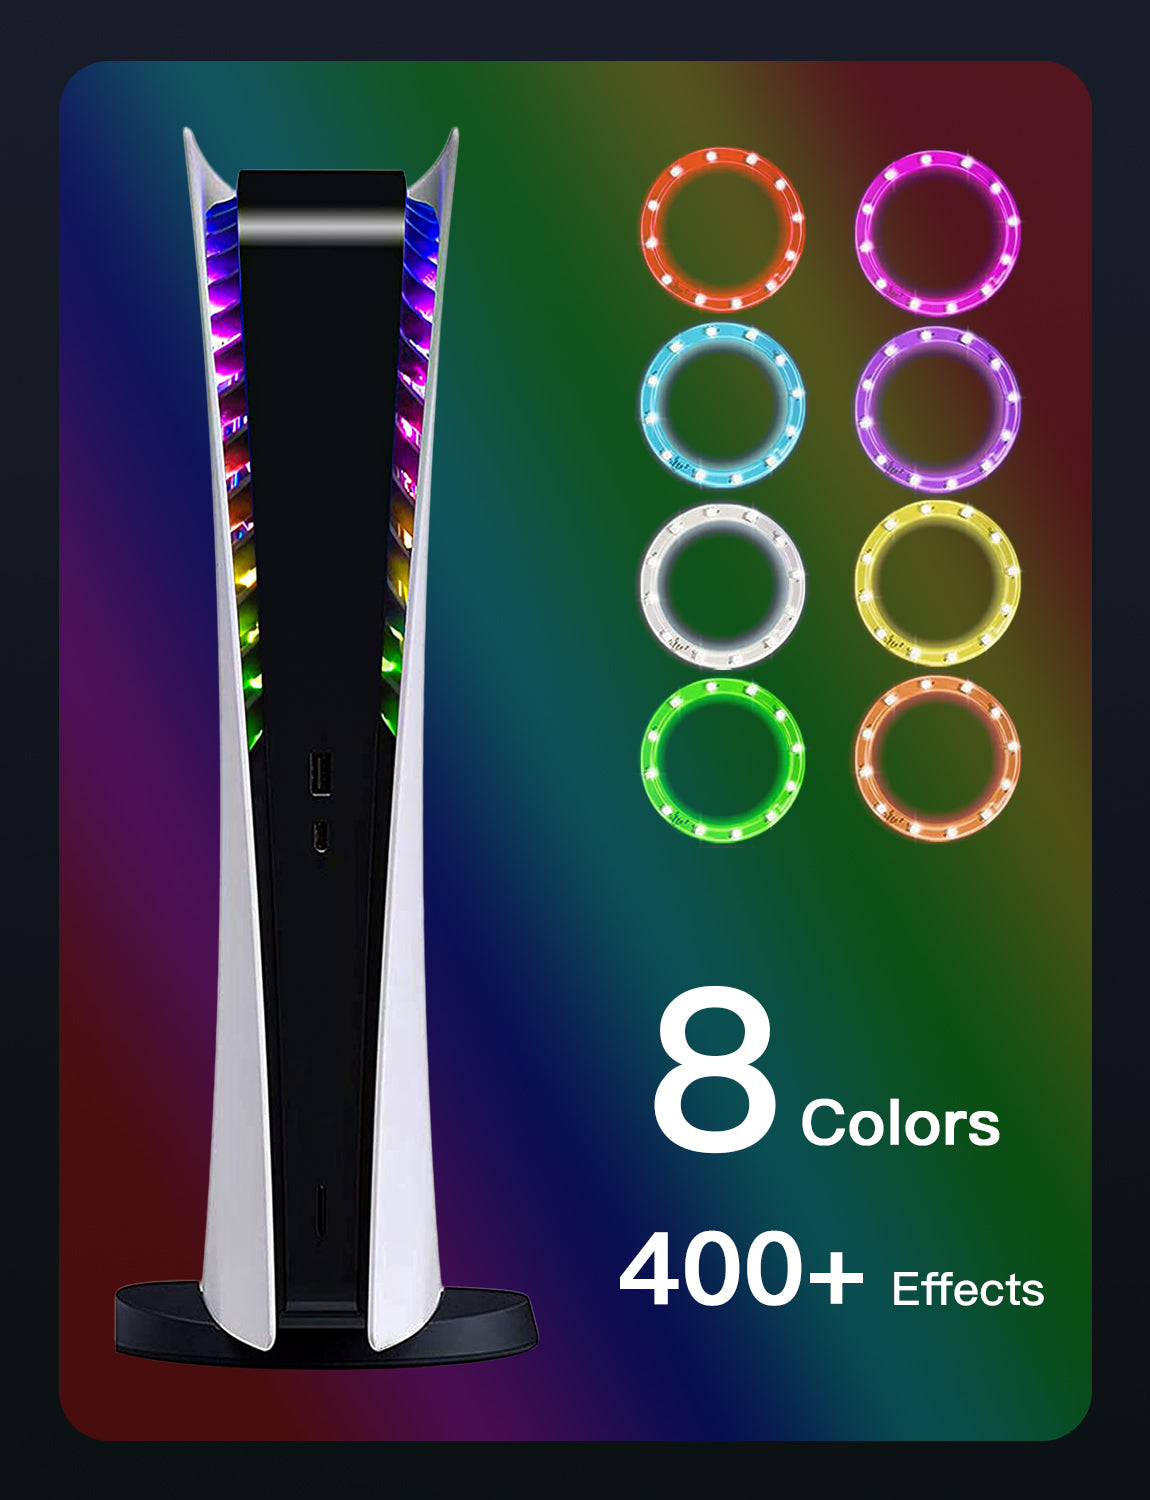 Introducing the RGB LED Light Strip for Playstation 5: 8 Colors & 400+ Effects!